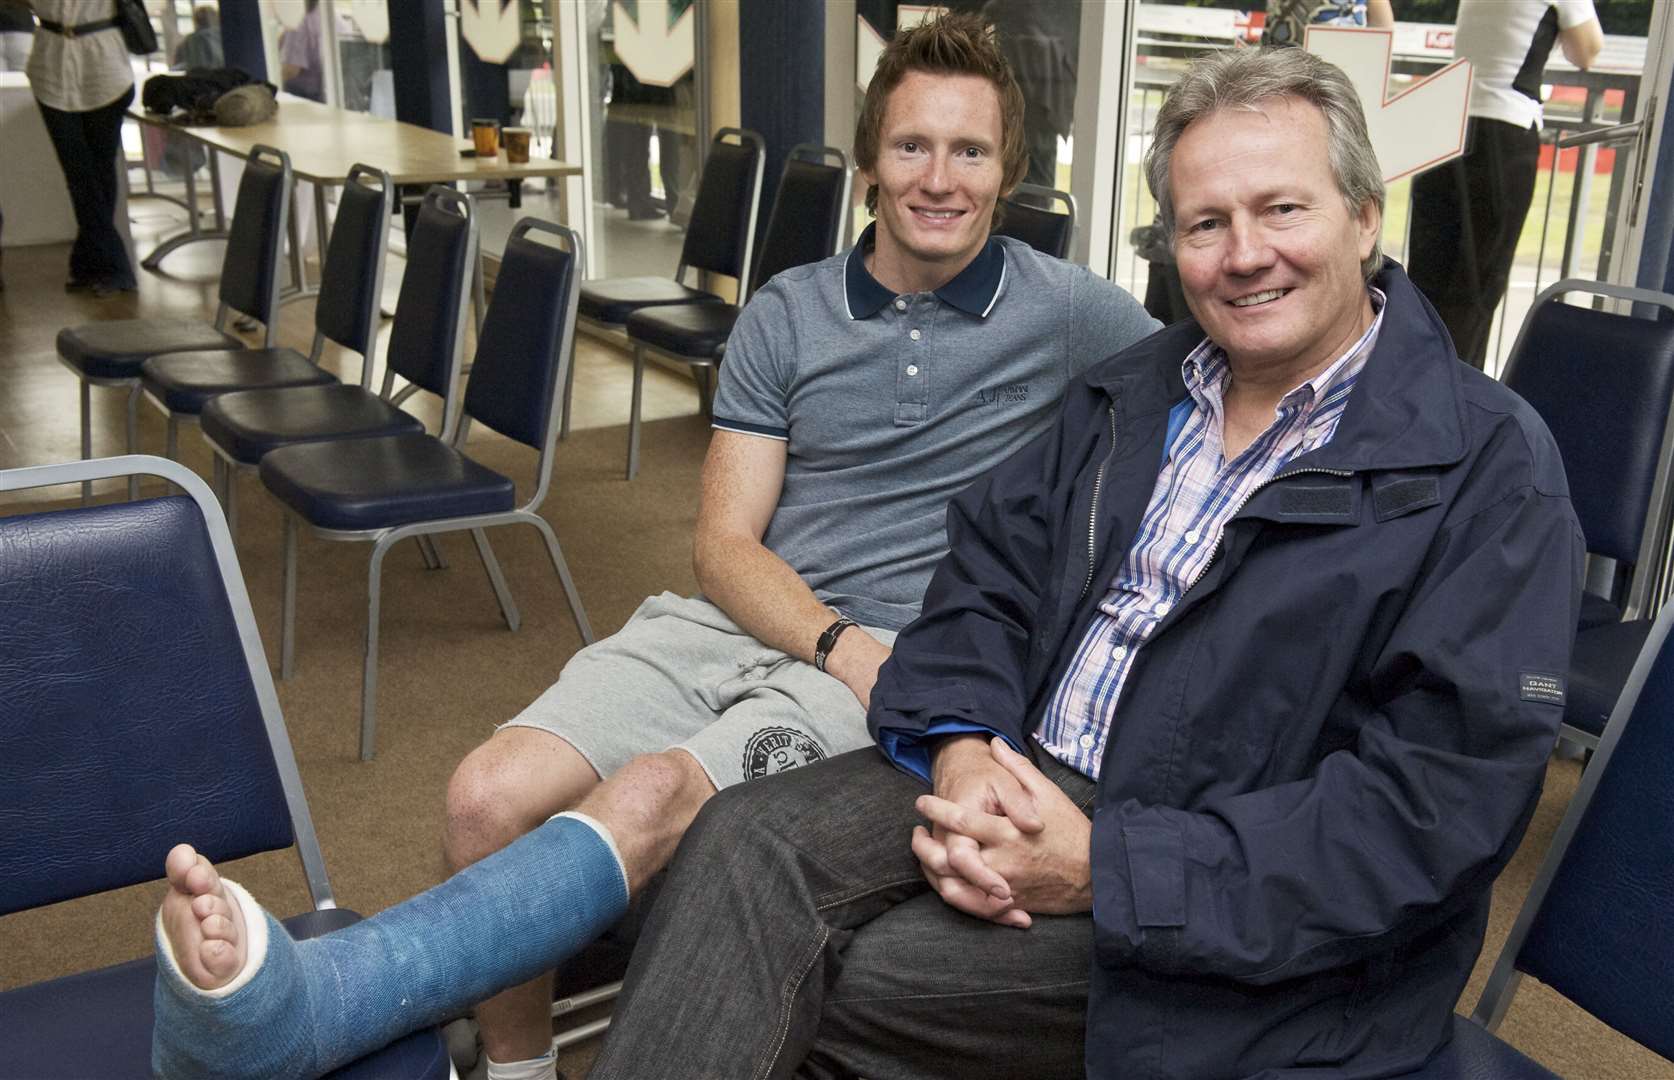 World Endurance Championship racer Mike Conway with his dad Michael in July 2010. Mike, from Sevenoaks, had broken his leg in that year's Indy 500. Picture: Andy Payton